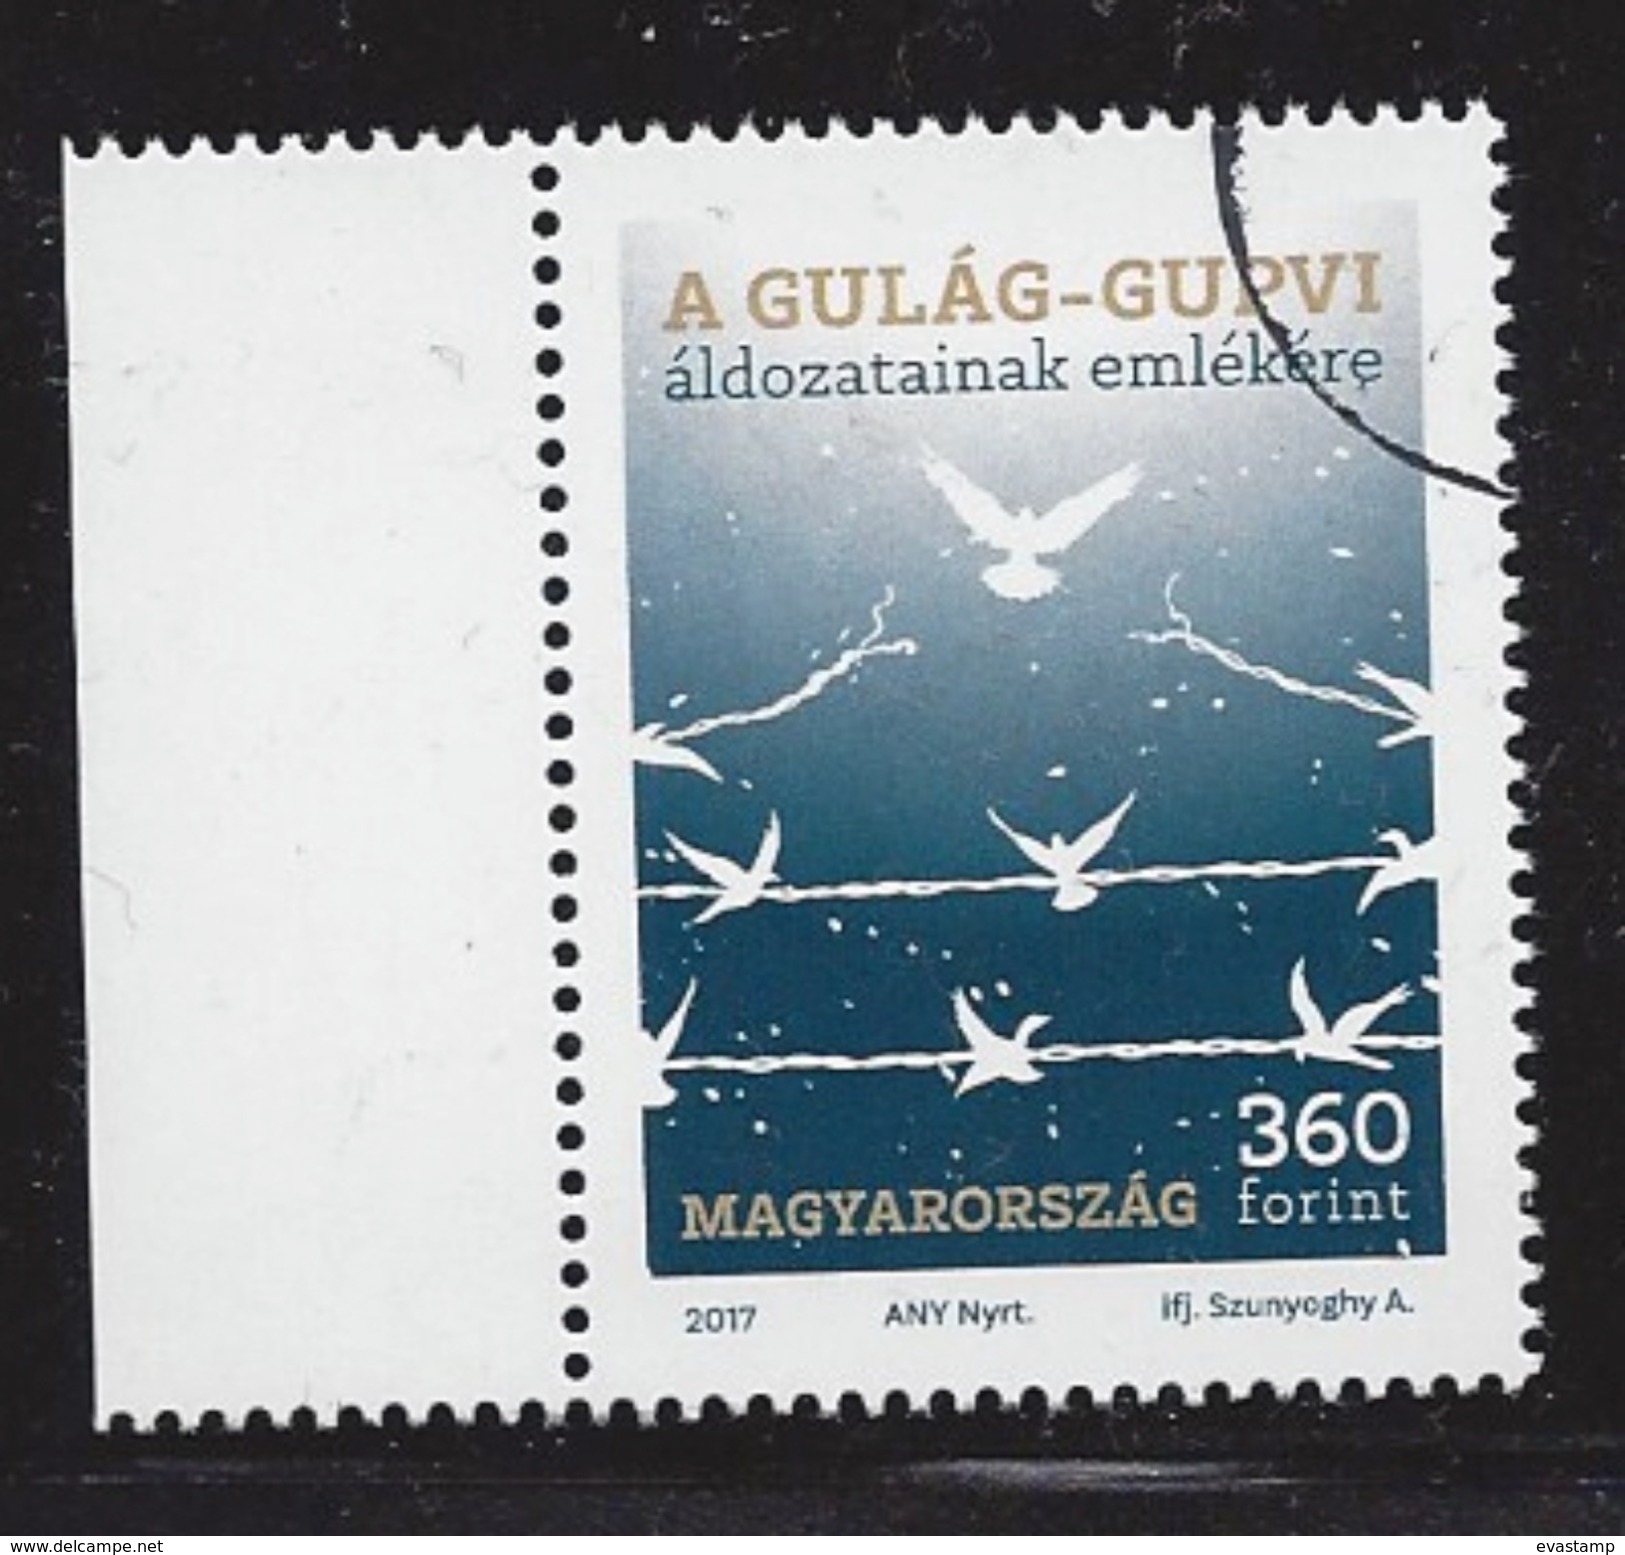 HUNGARY - 2017.In Memoriam Of The Victims Of The GULAG/GUPVI-70th Anniversary Of The Deportation Of Bela Kovacs SPECIMEN - Proofs & Reprints